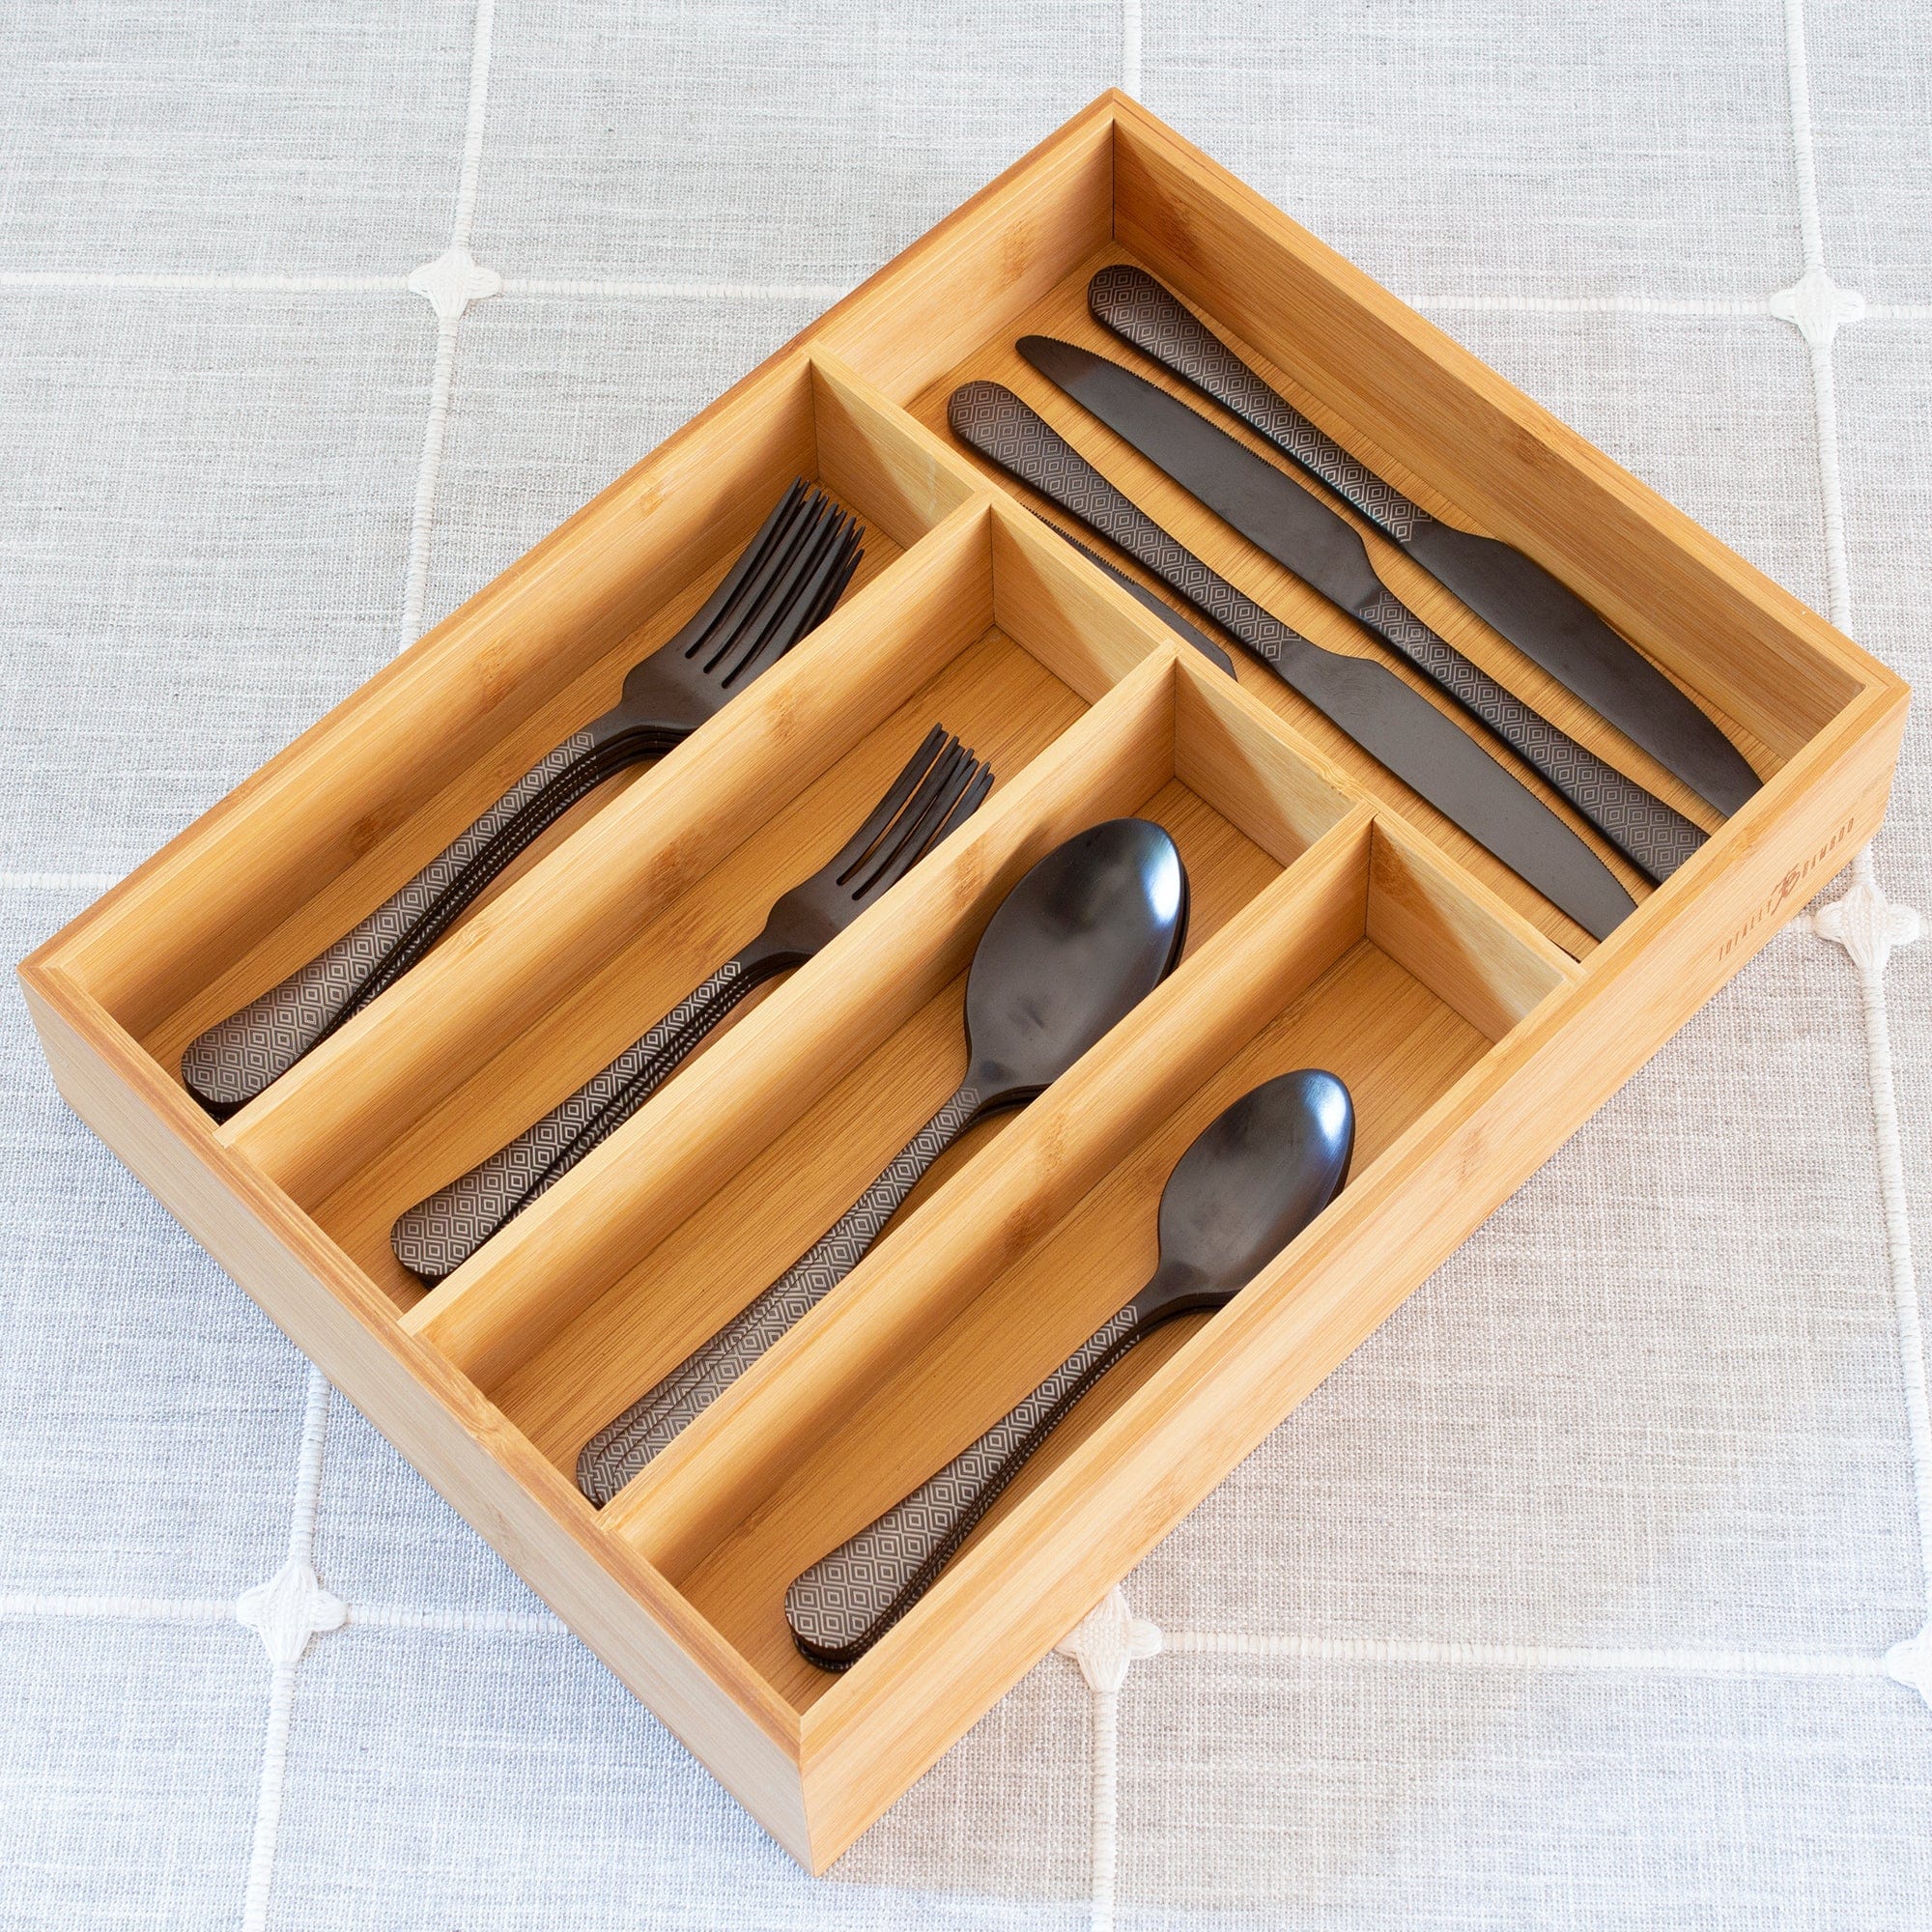 Totally Bamboo 5-Compartment Silverware Drawer Organizer, 14" x 10-1/4" x 2"